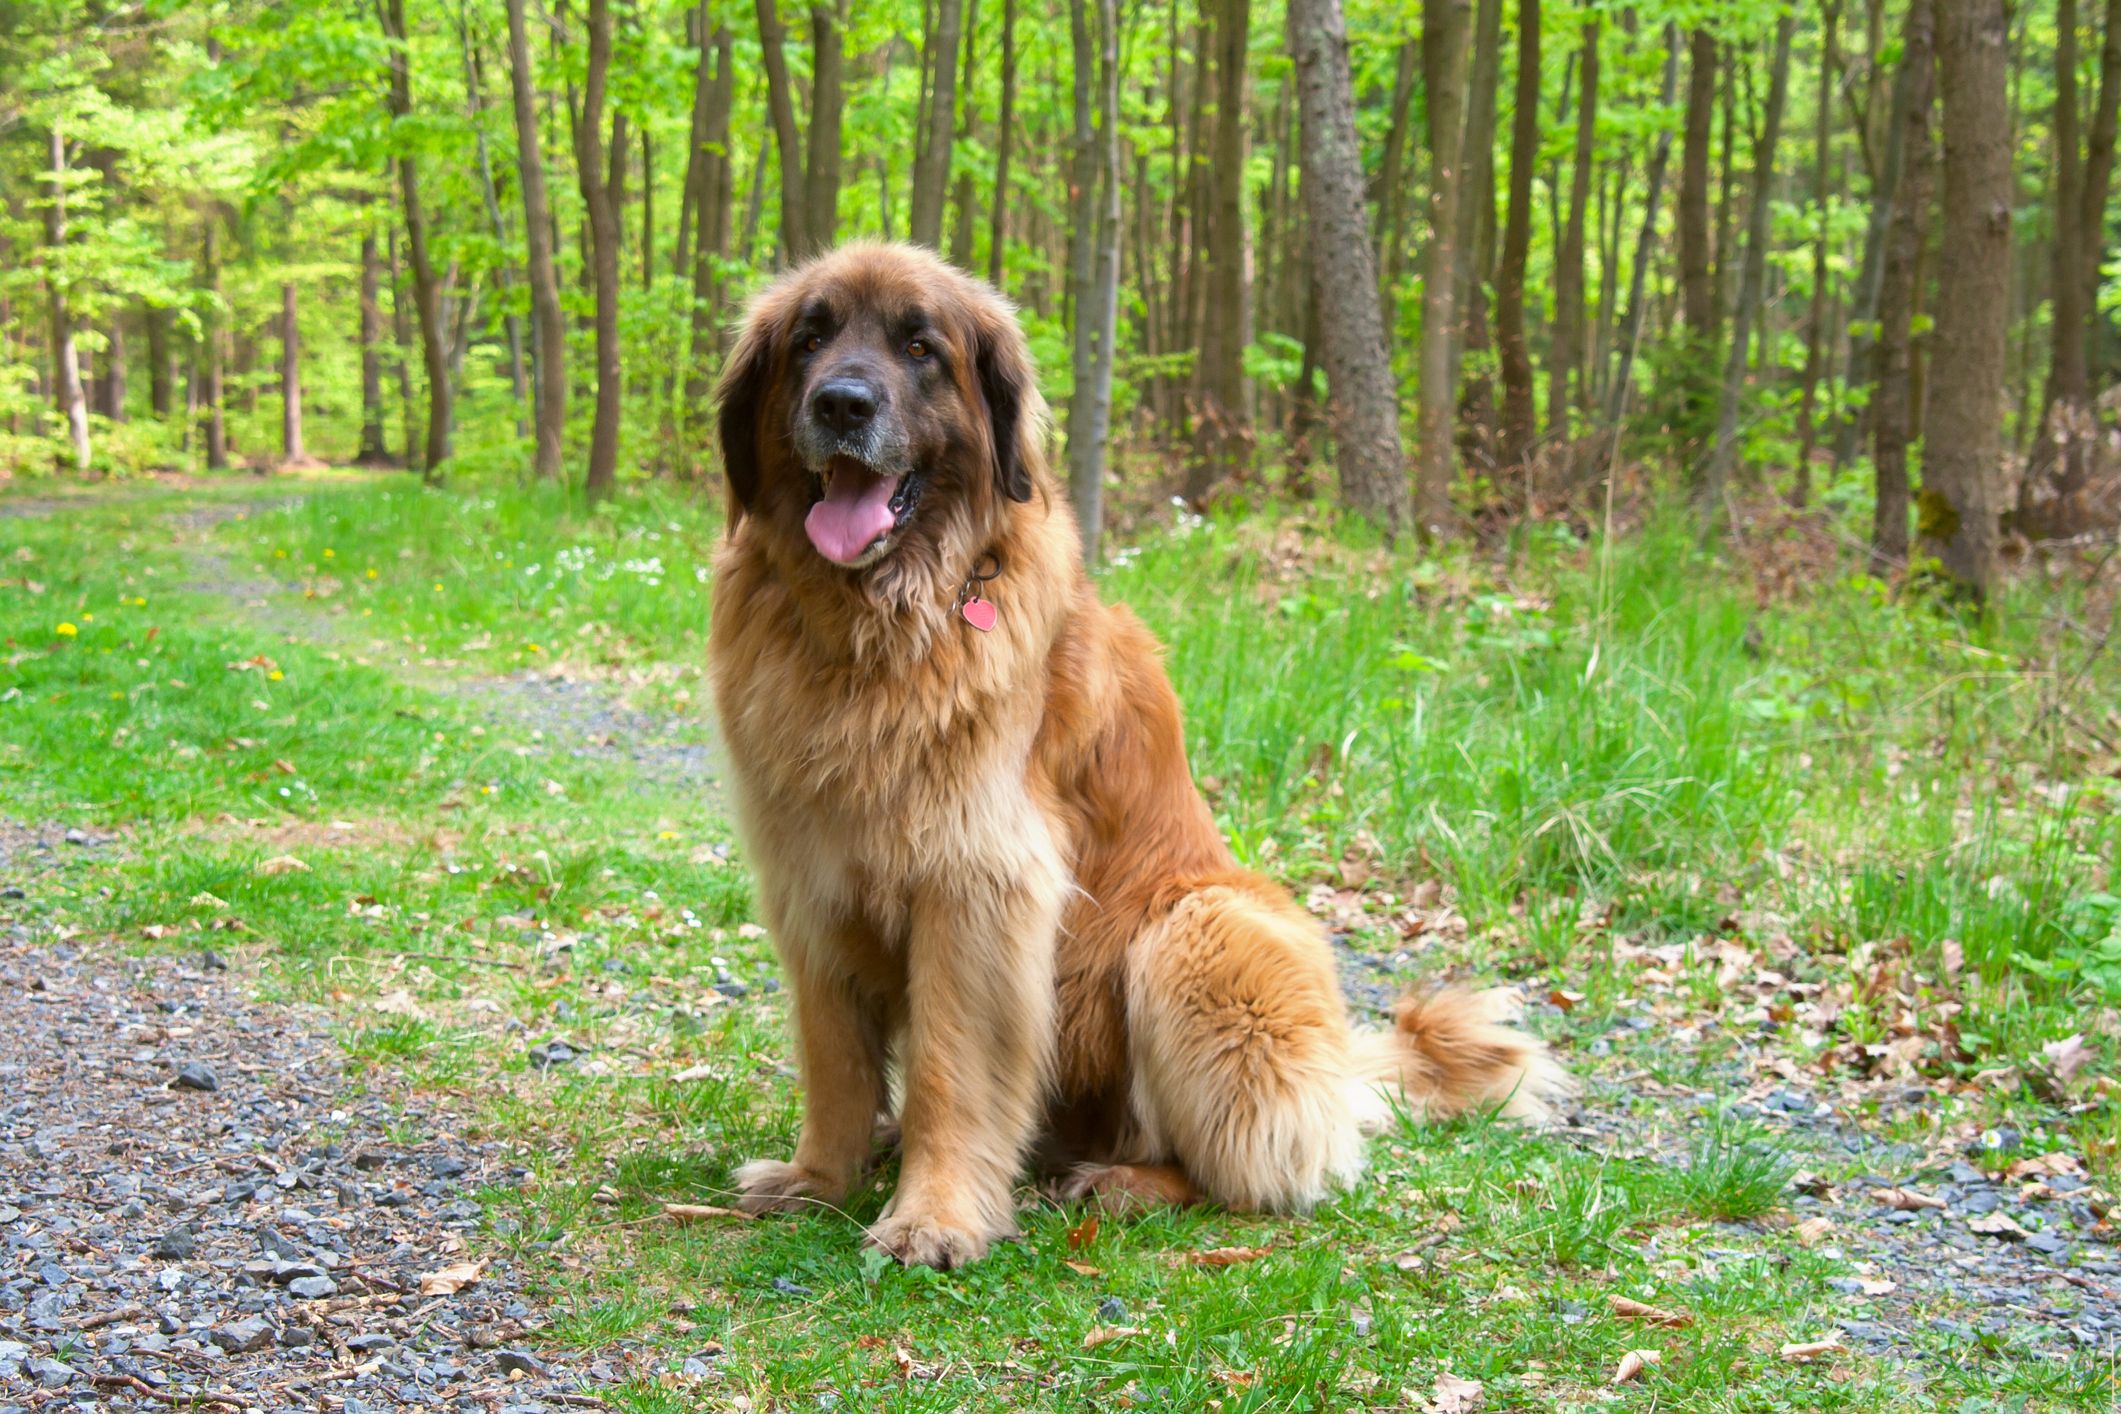 15 Brown Dog Breeds - Most Popular Brown Dogs